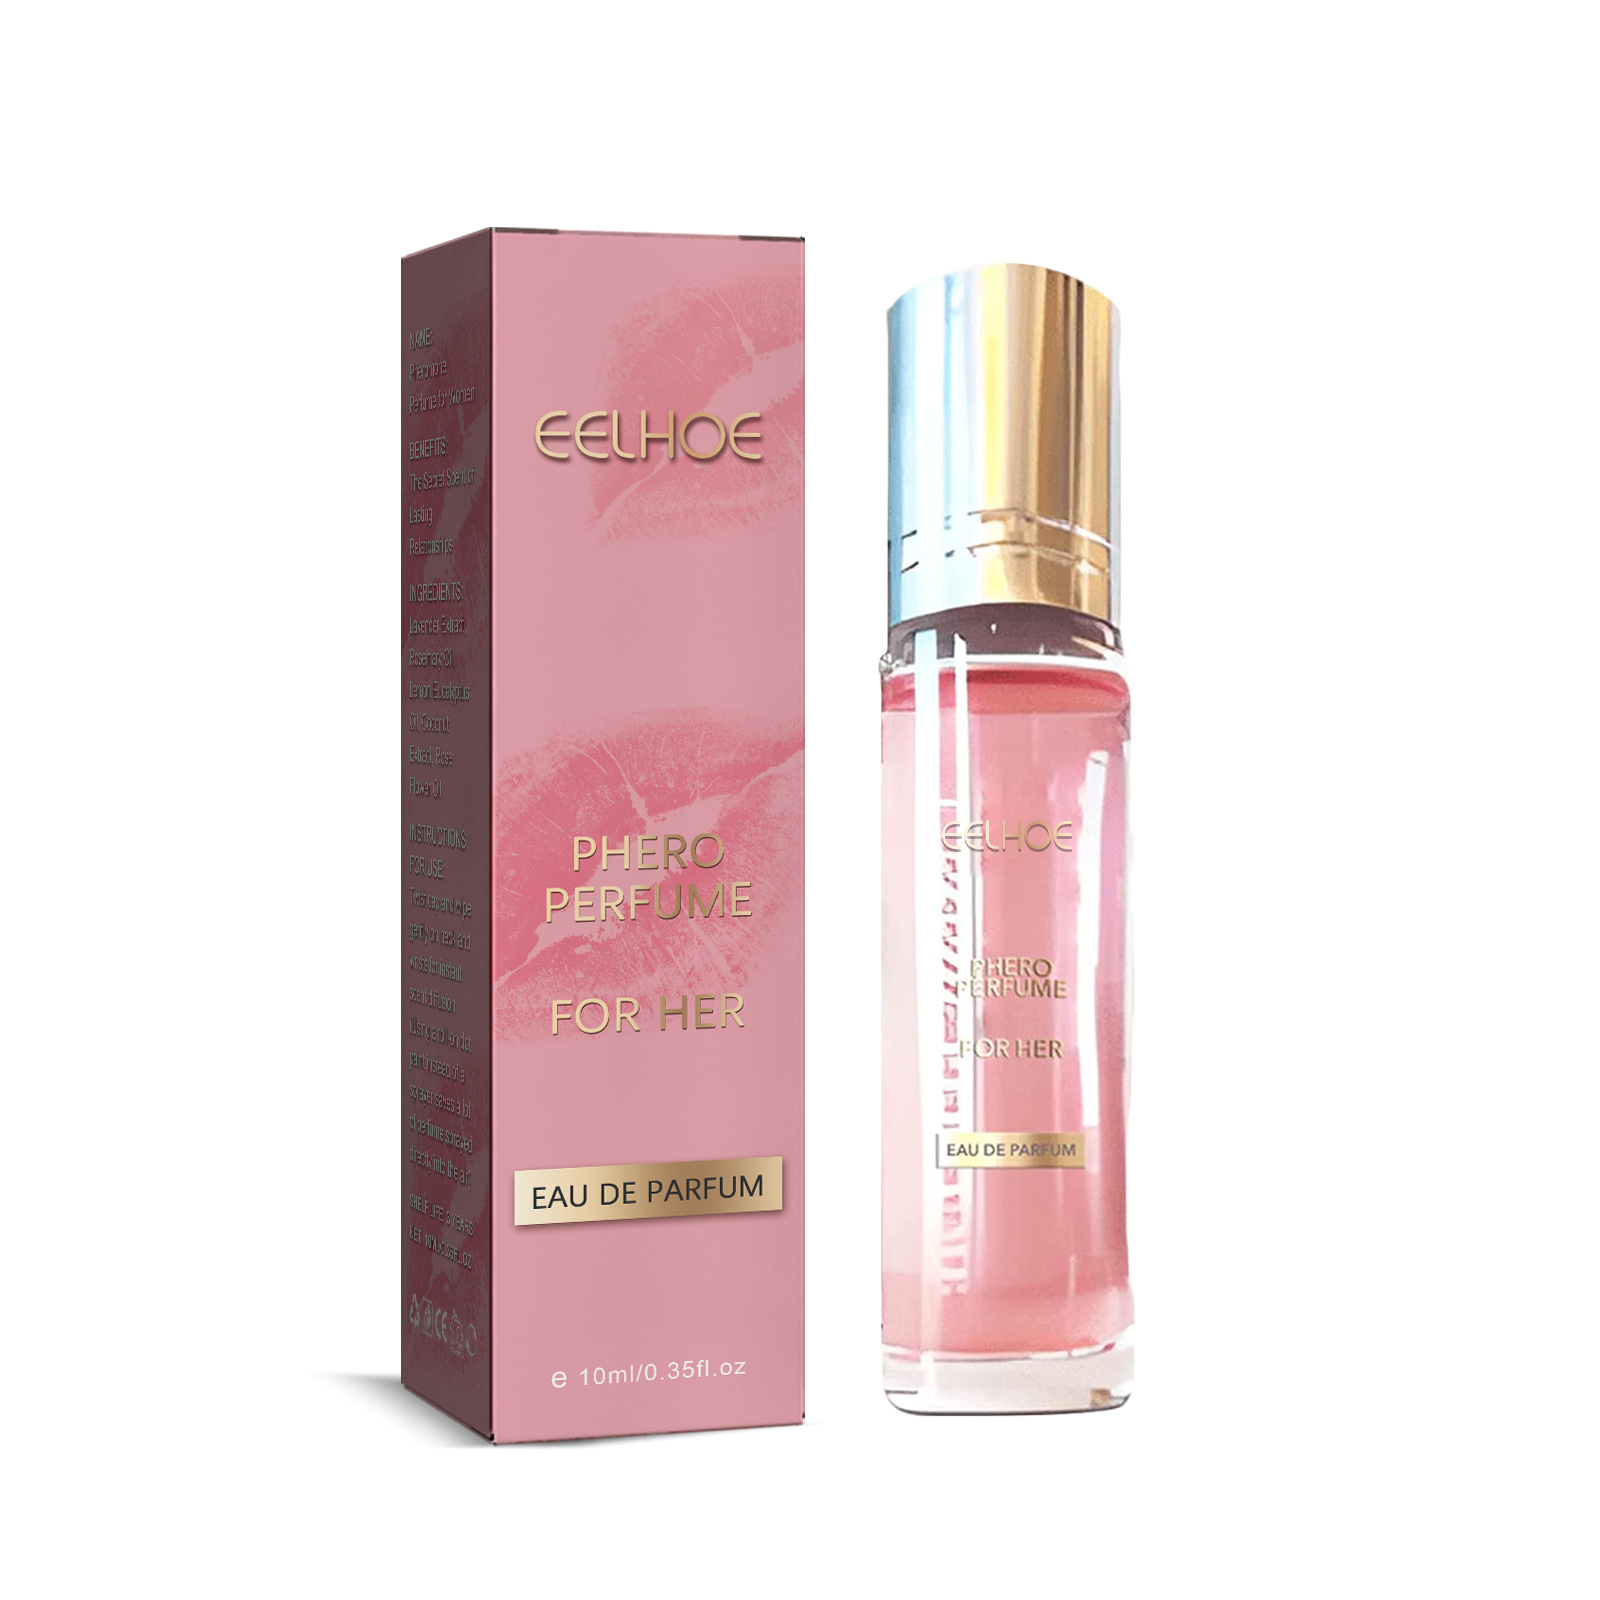 (Last Day Promotion - 50% OFF) Pheromone Perfume💕BUY 1 GET 1 FREE TODAY